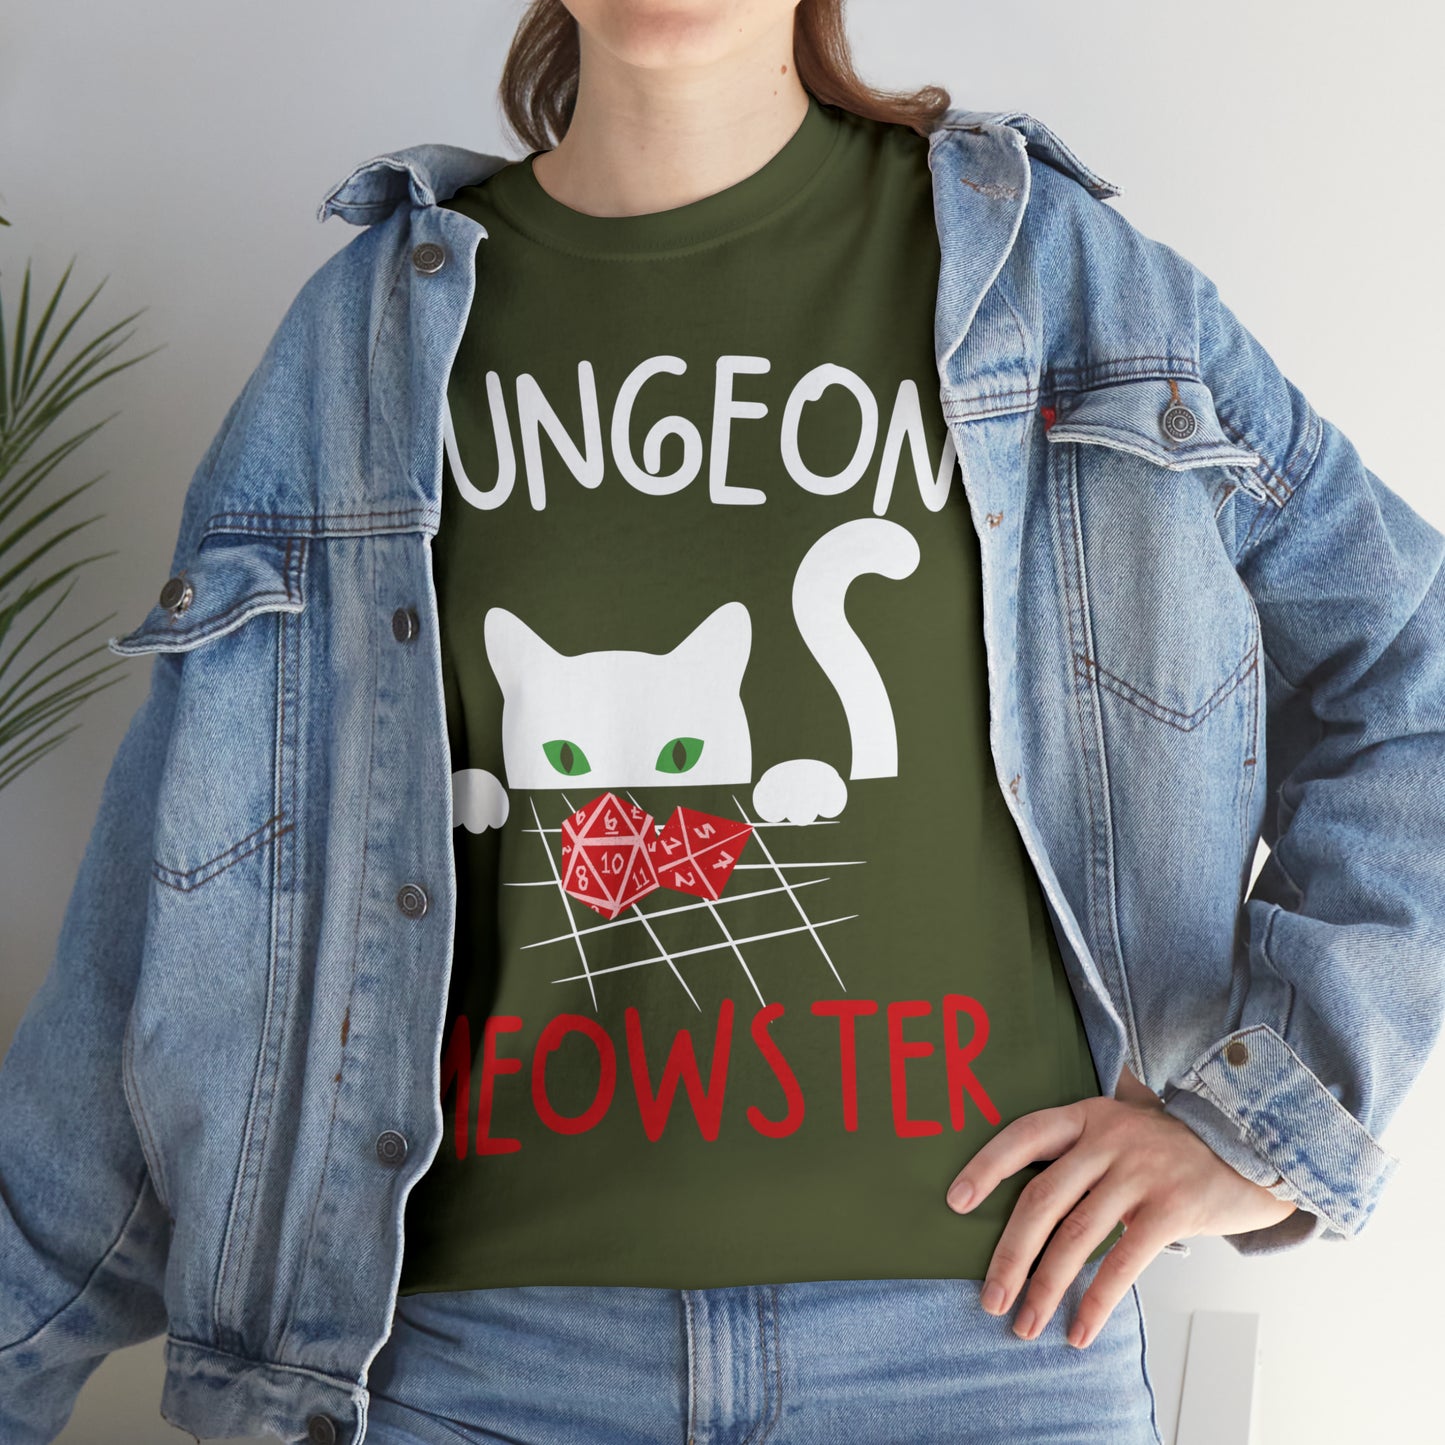 Beware of The Dungeon Meowster! It Wants To Steal Your D20